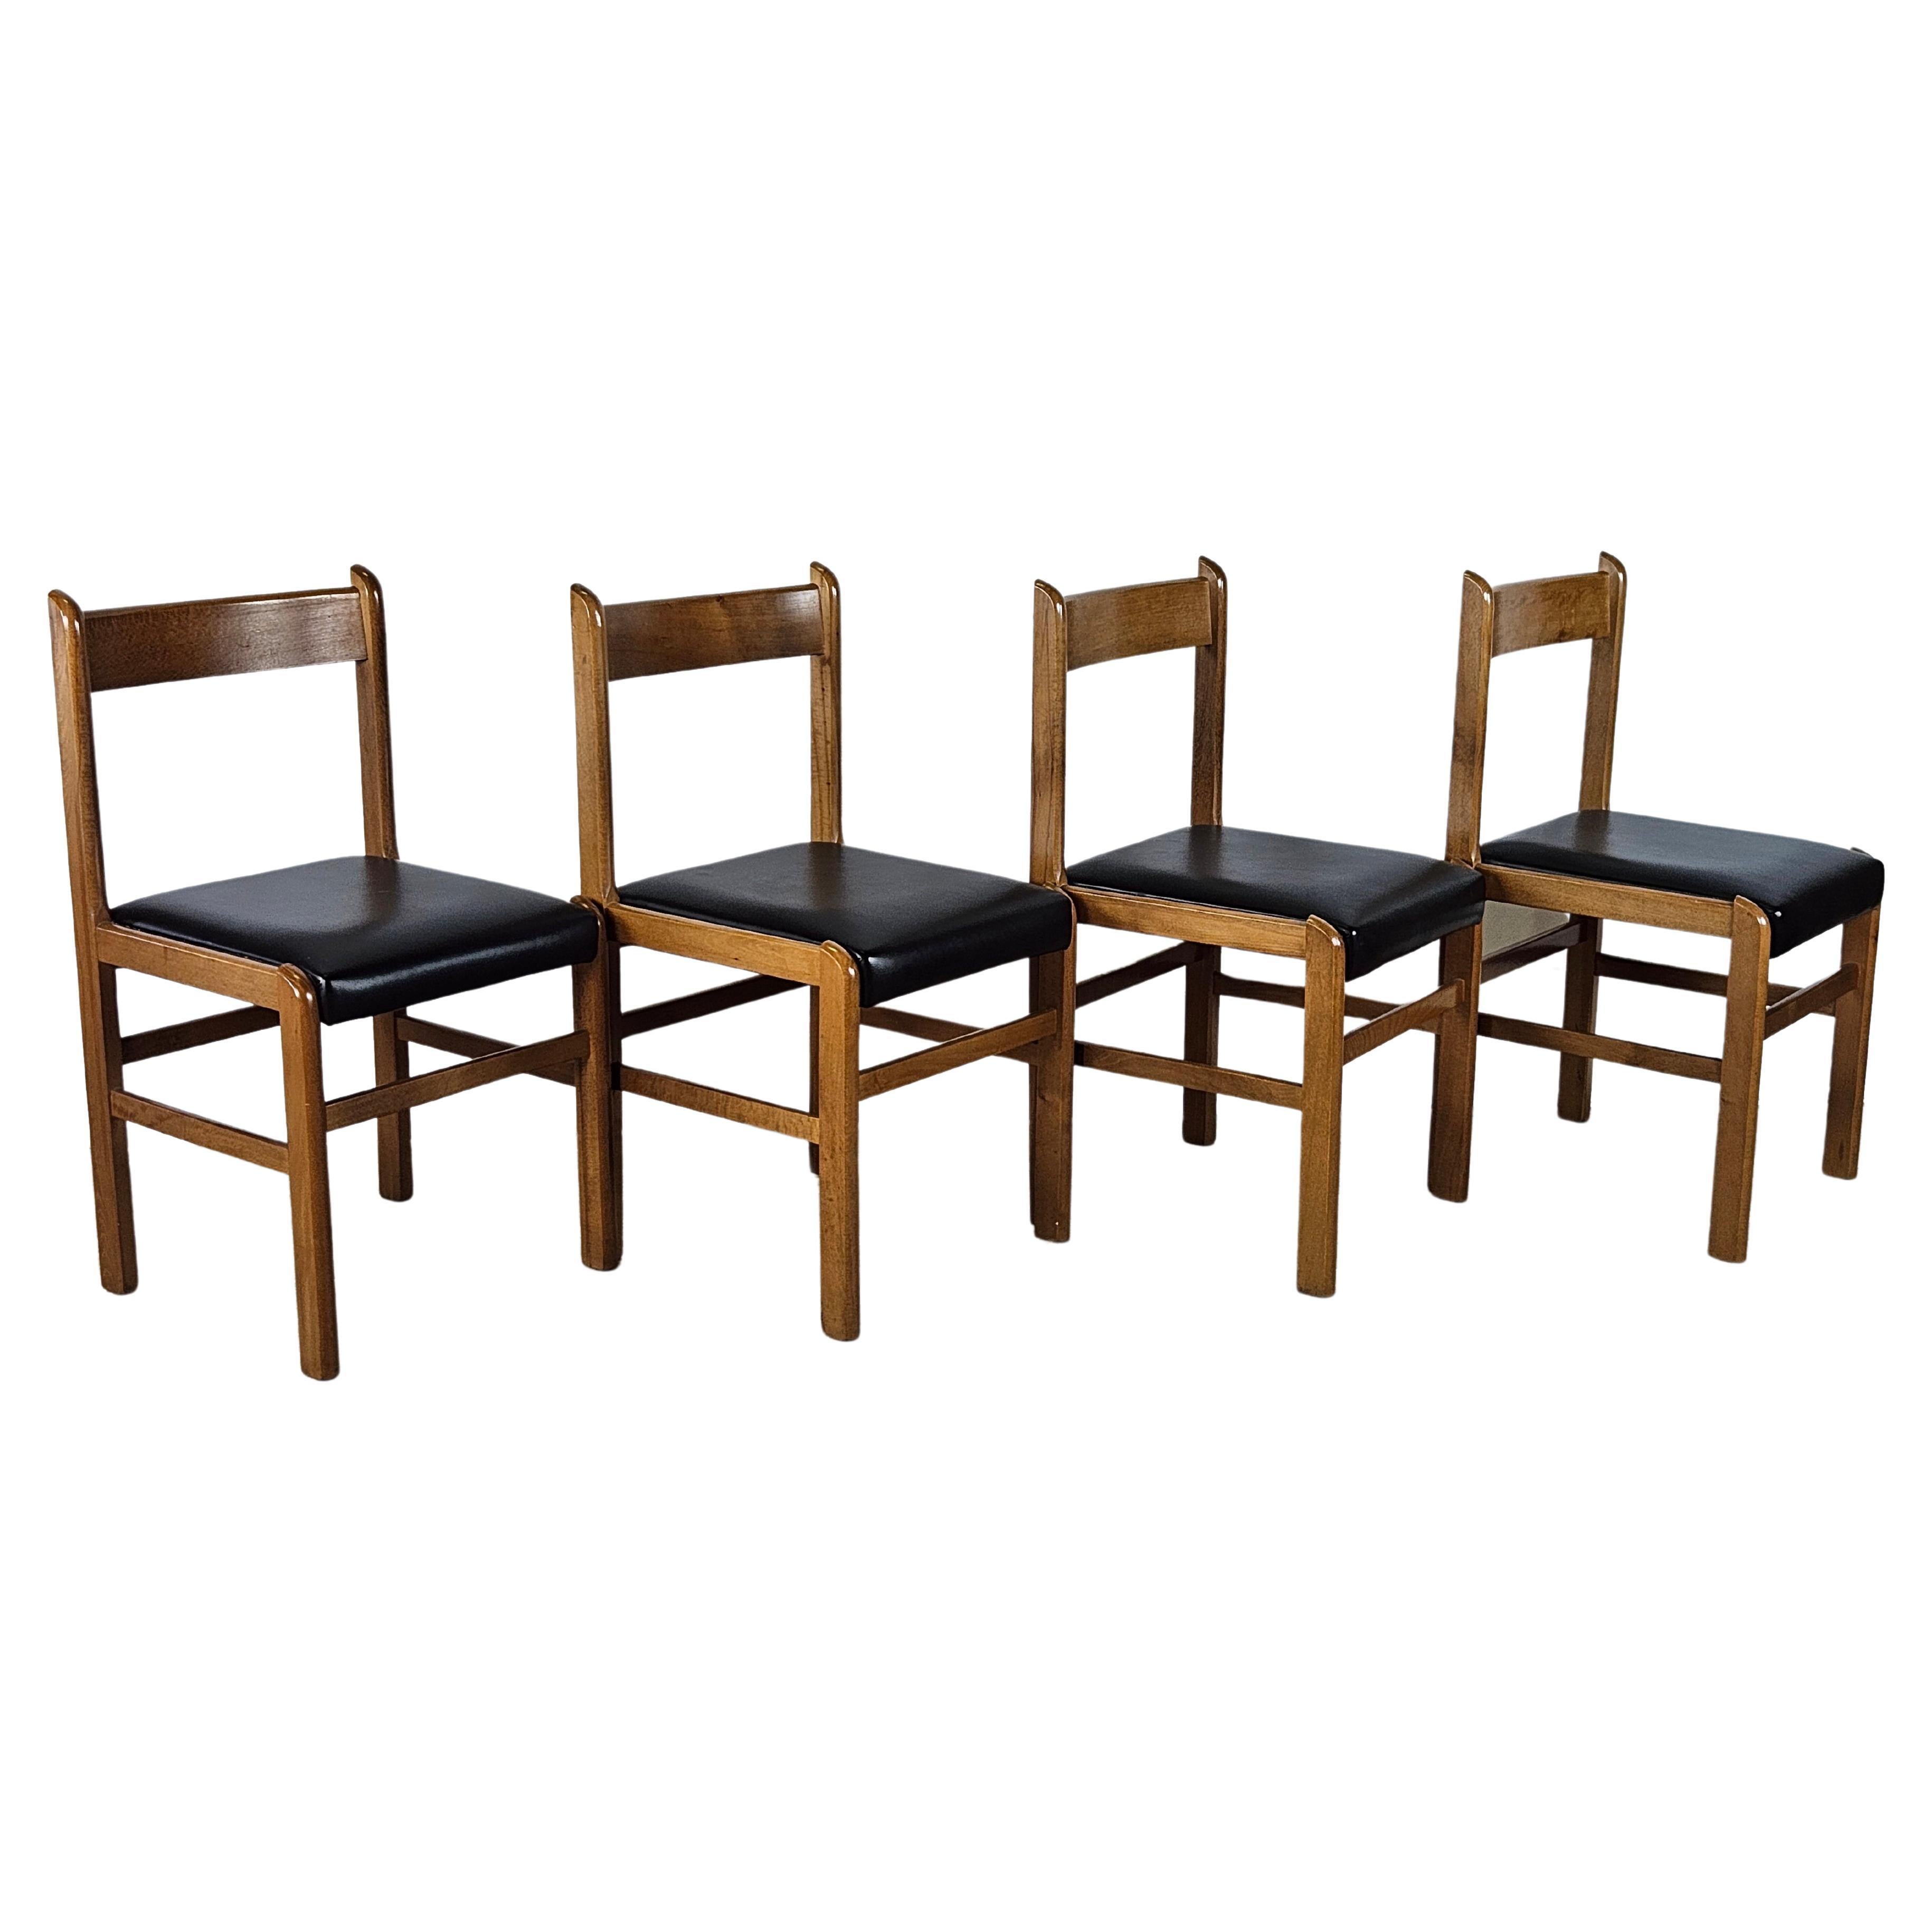 Set of four beech and leather chairs